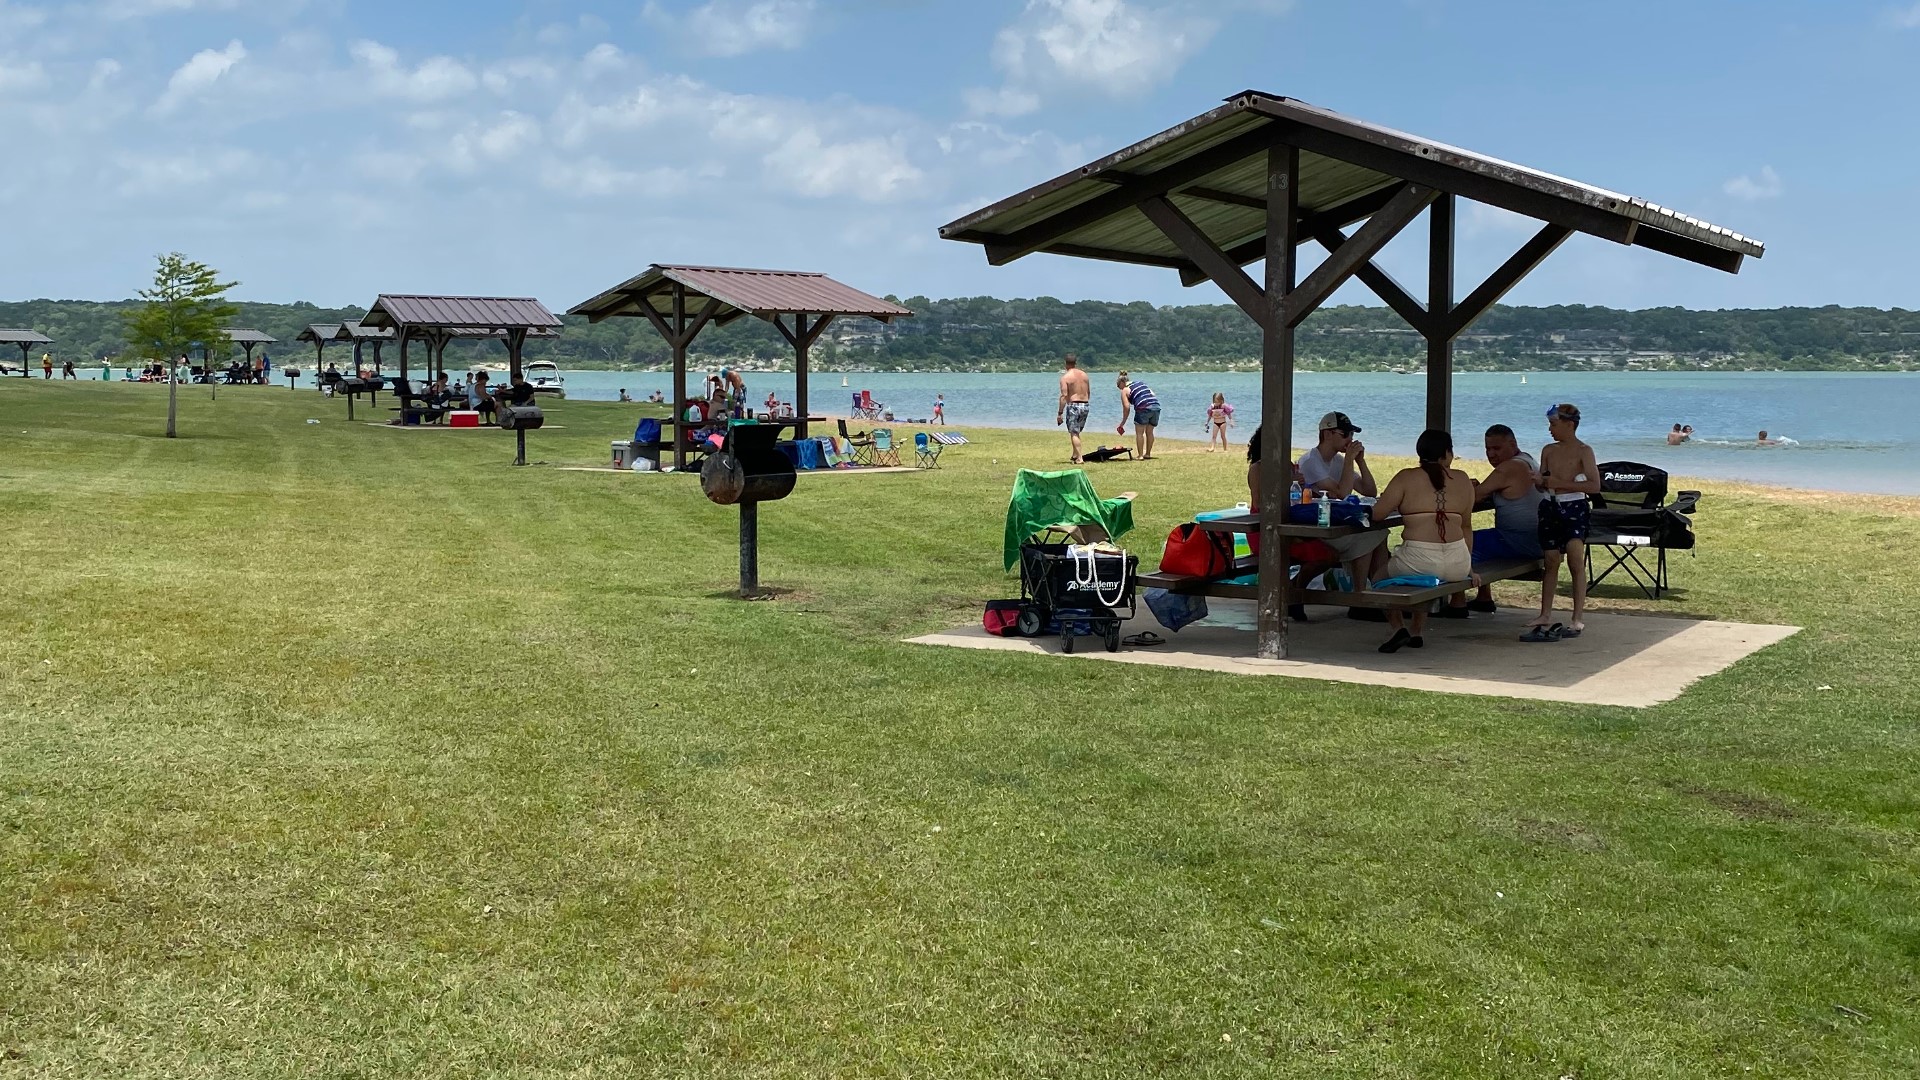 Temple Lake Park has seen a record number of visitation since opening earlier this month and law officials say they are prepared for large crowds of people.